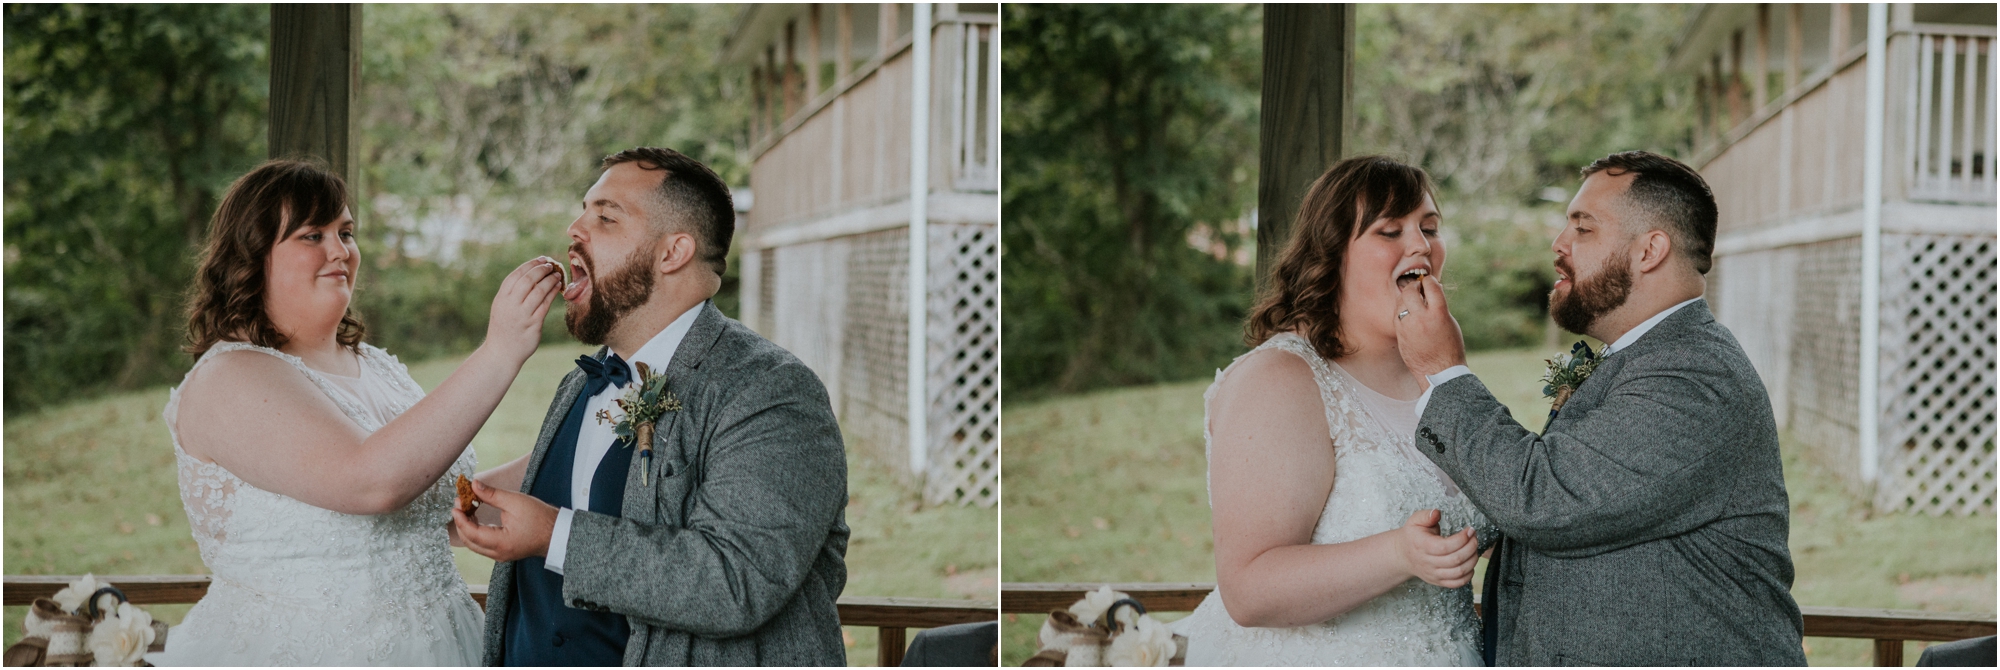 caryville-robbins-middle-tennessee-intimate-cozy-fall-navy-rustic-backyard-wedding_0127.jpg